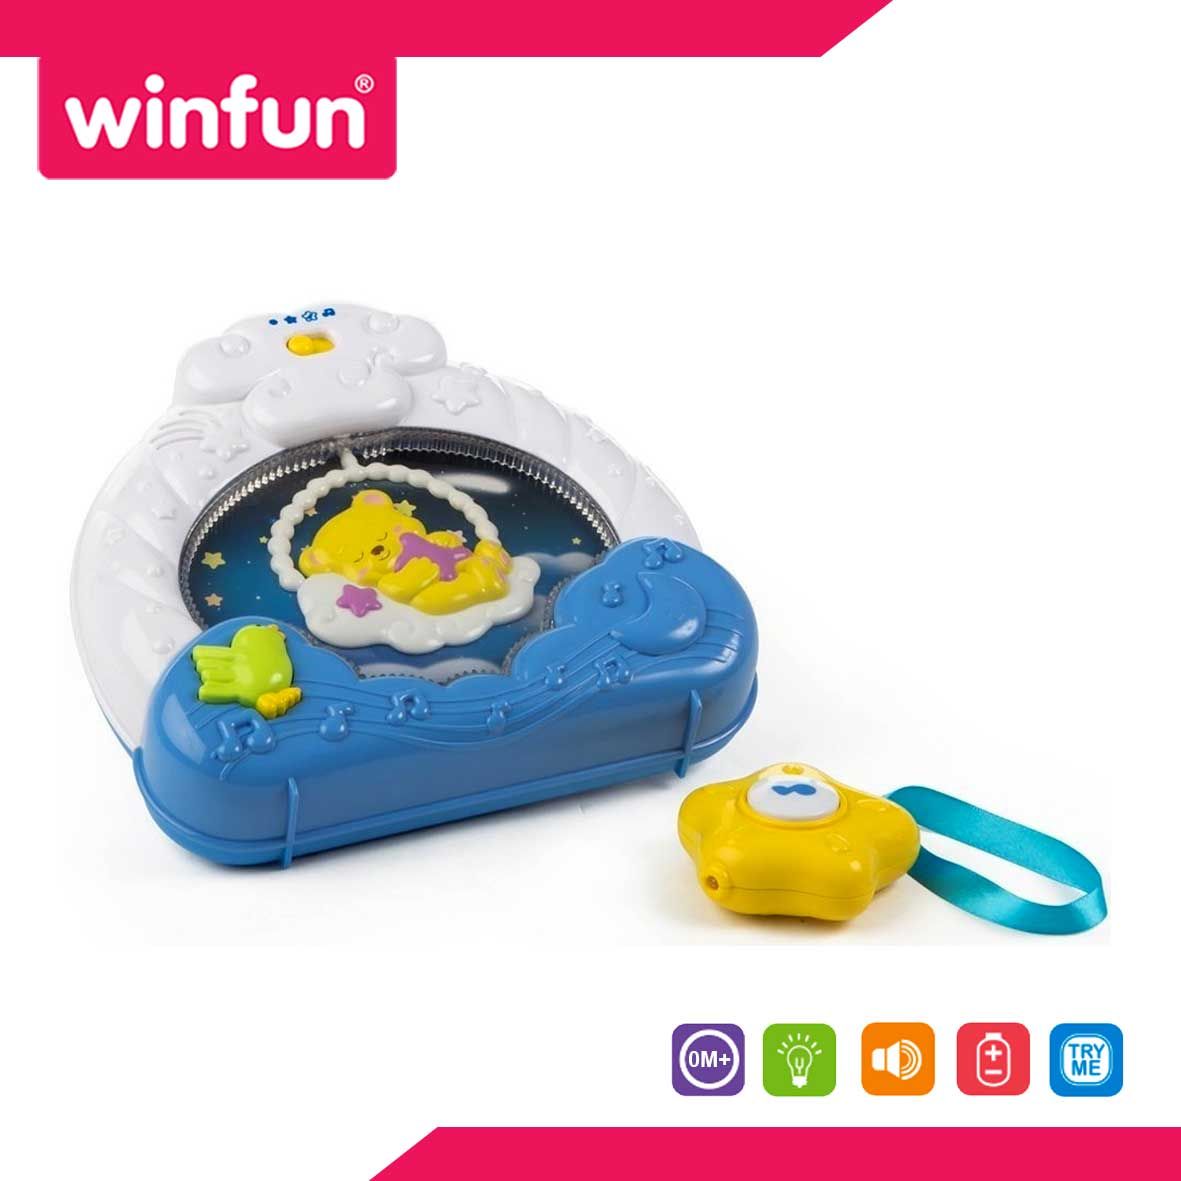 Winfun Lullaby Dreams Soothing Projector - 4